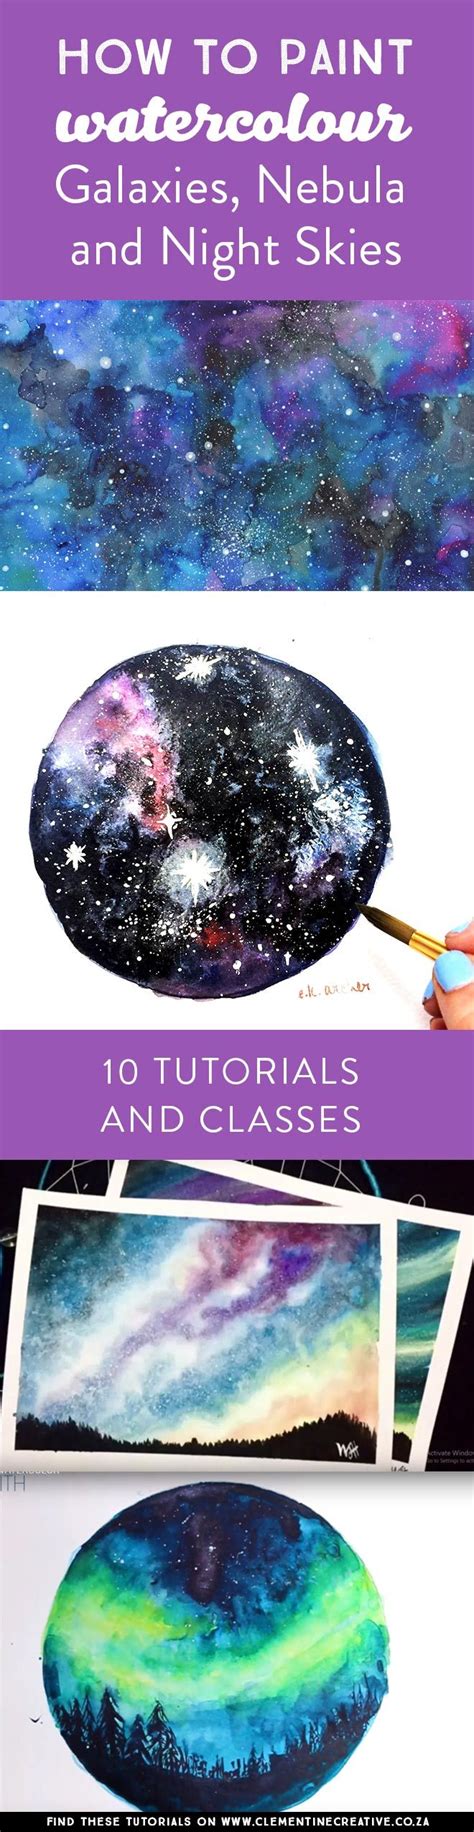 Step By Step Galaxy Tutorial Painting With Watercolor